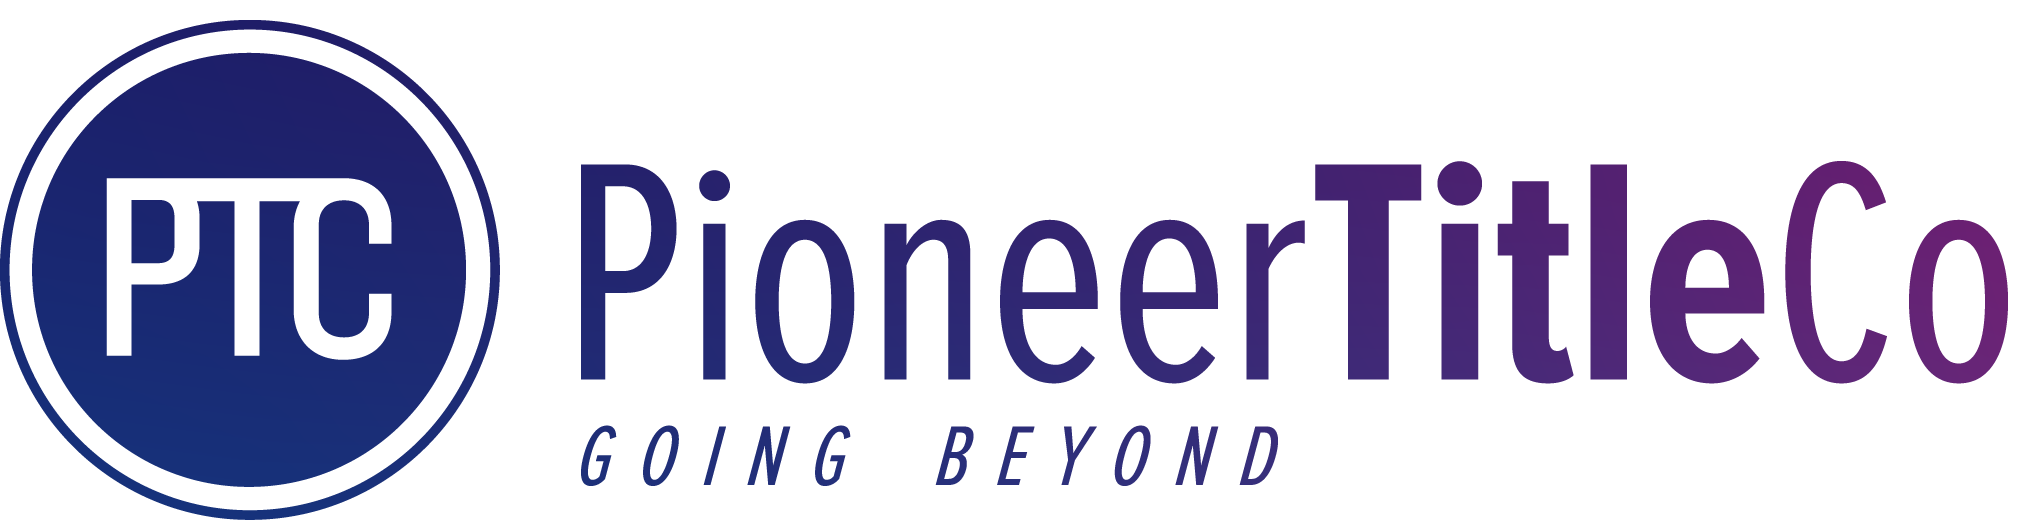 Pioneer Title Co – Going Beyond